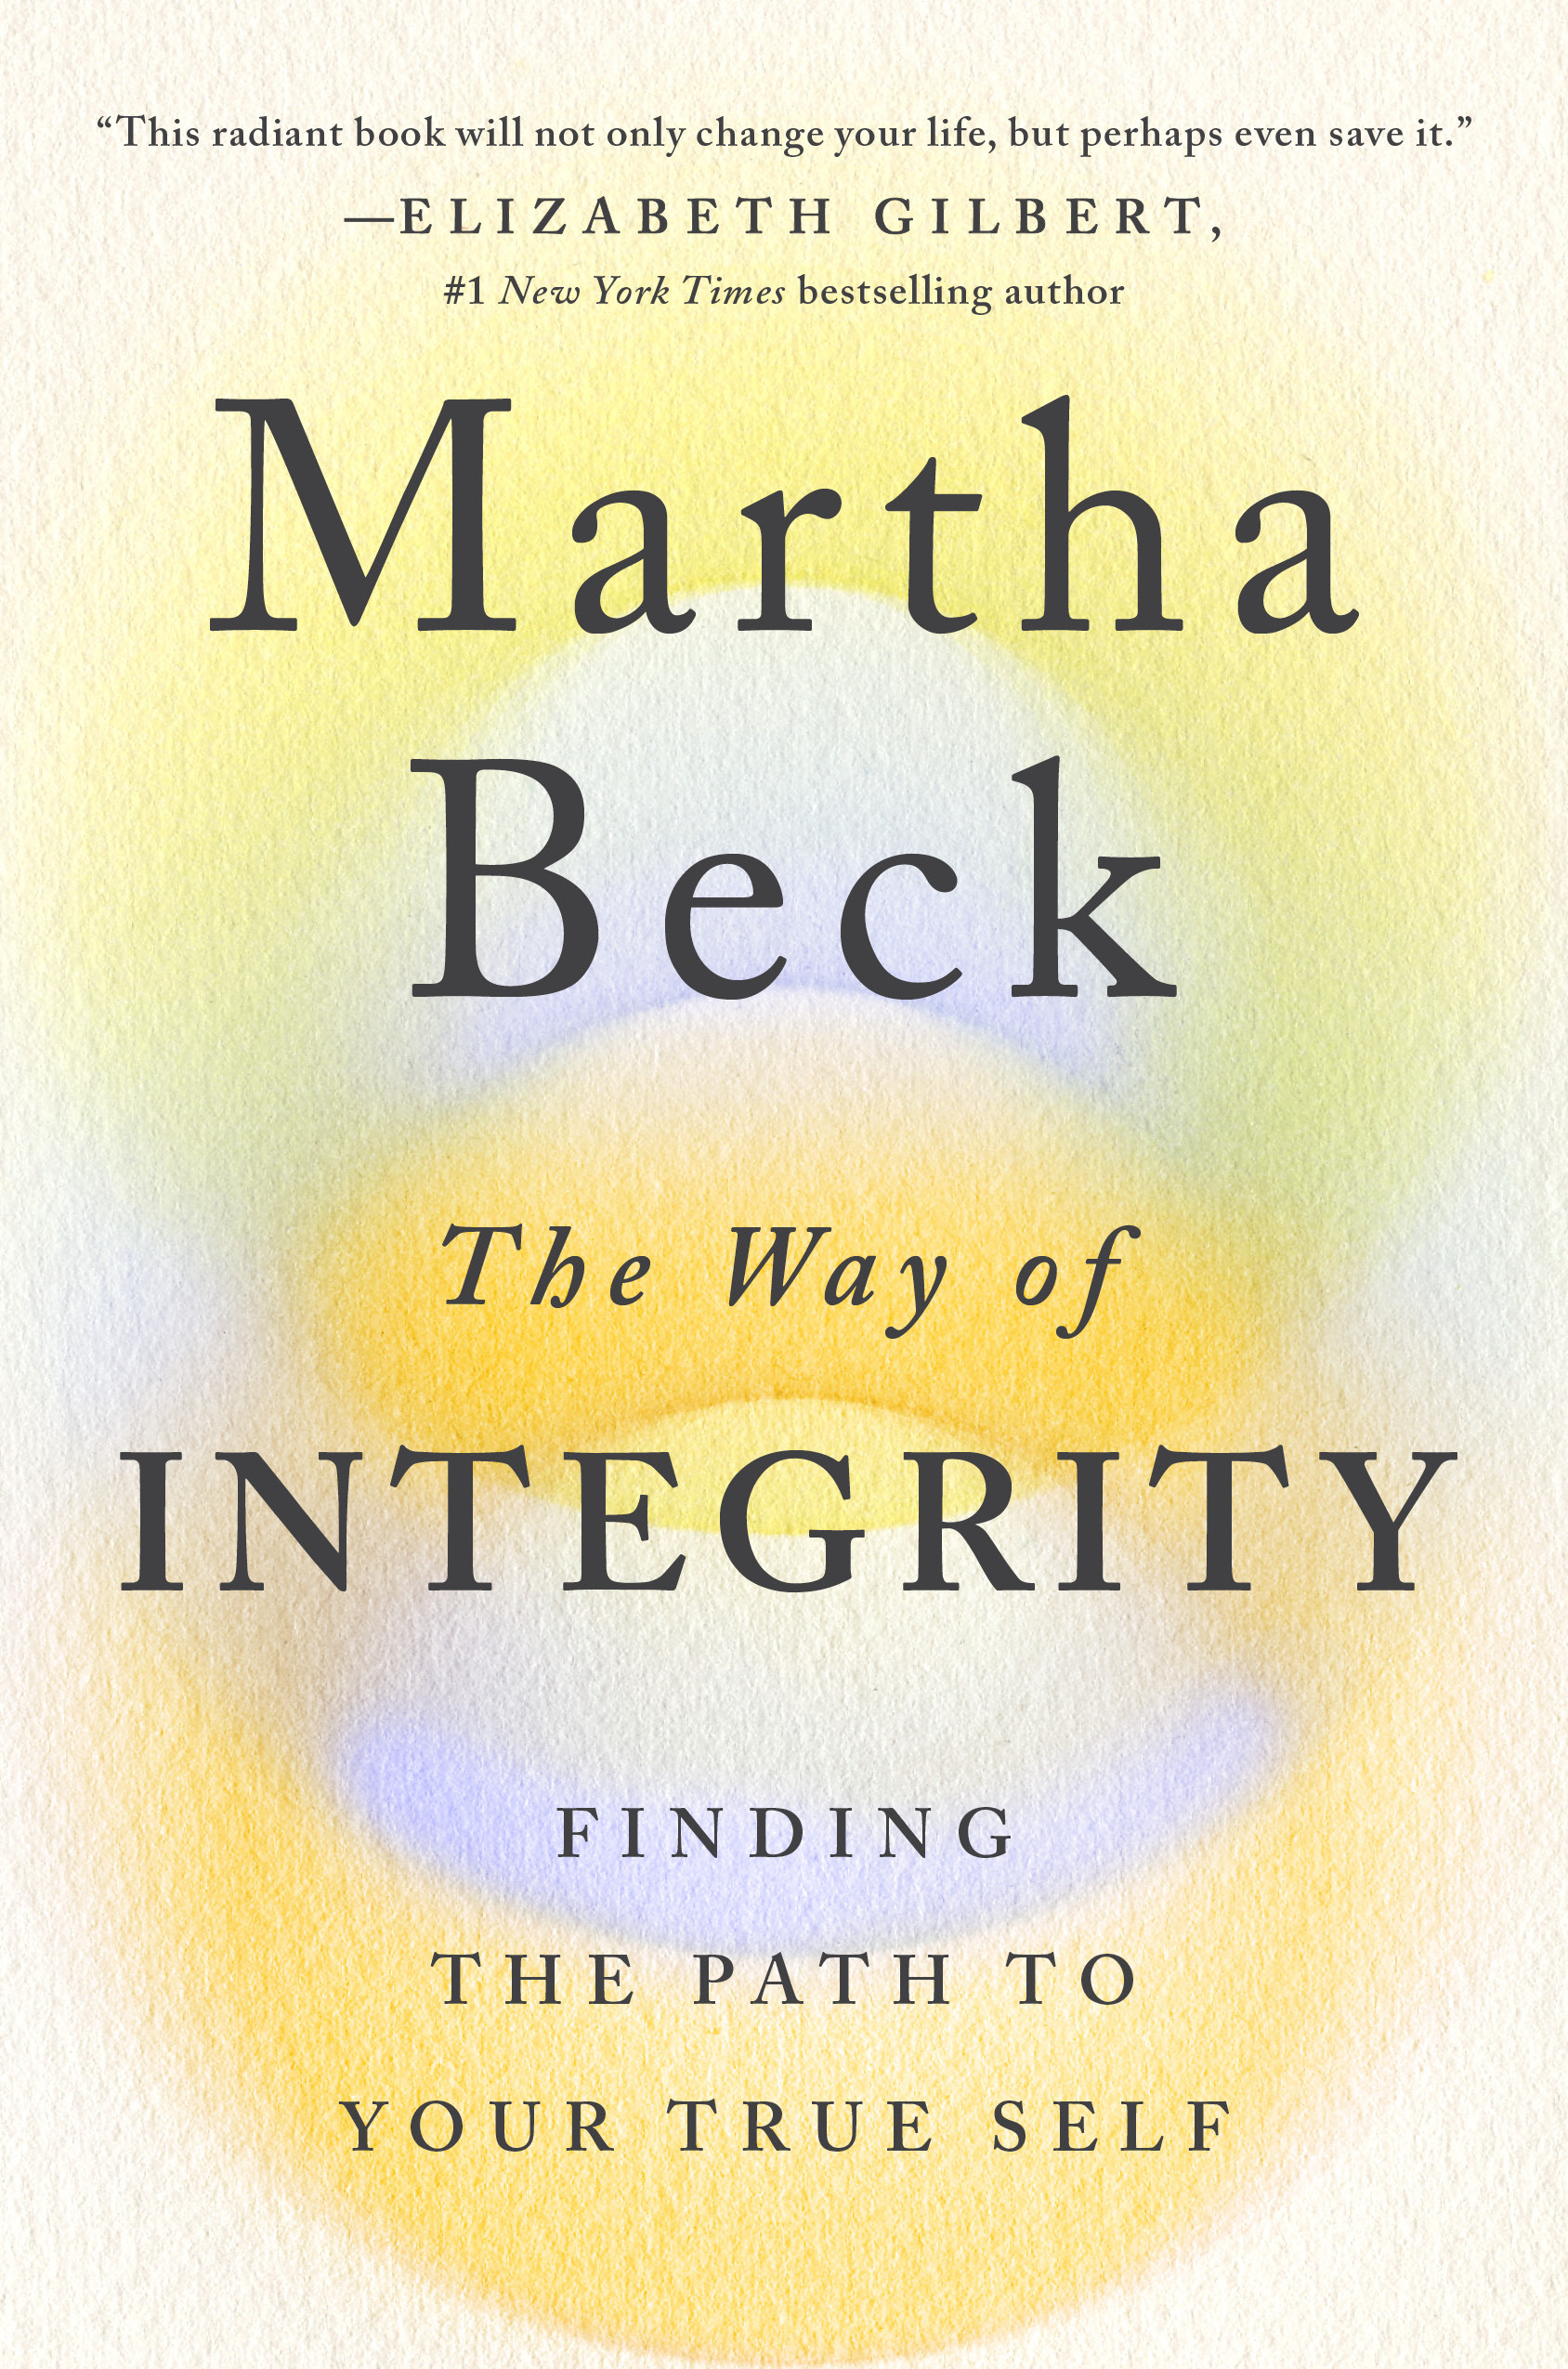 The Way of Integrity by Martha Beck book cover